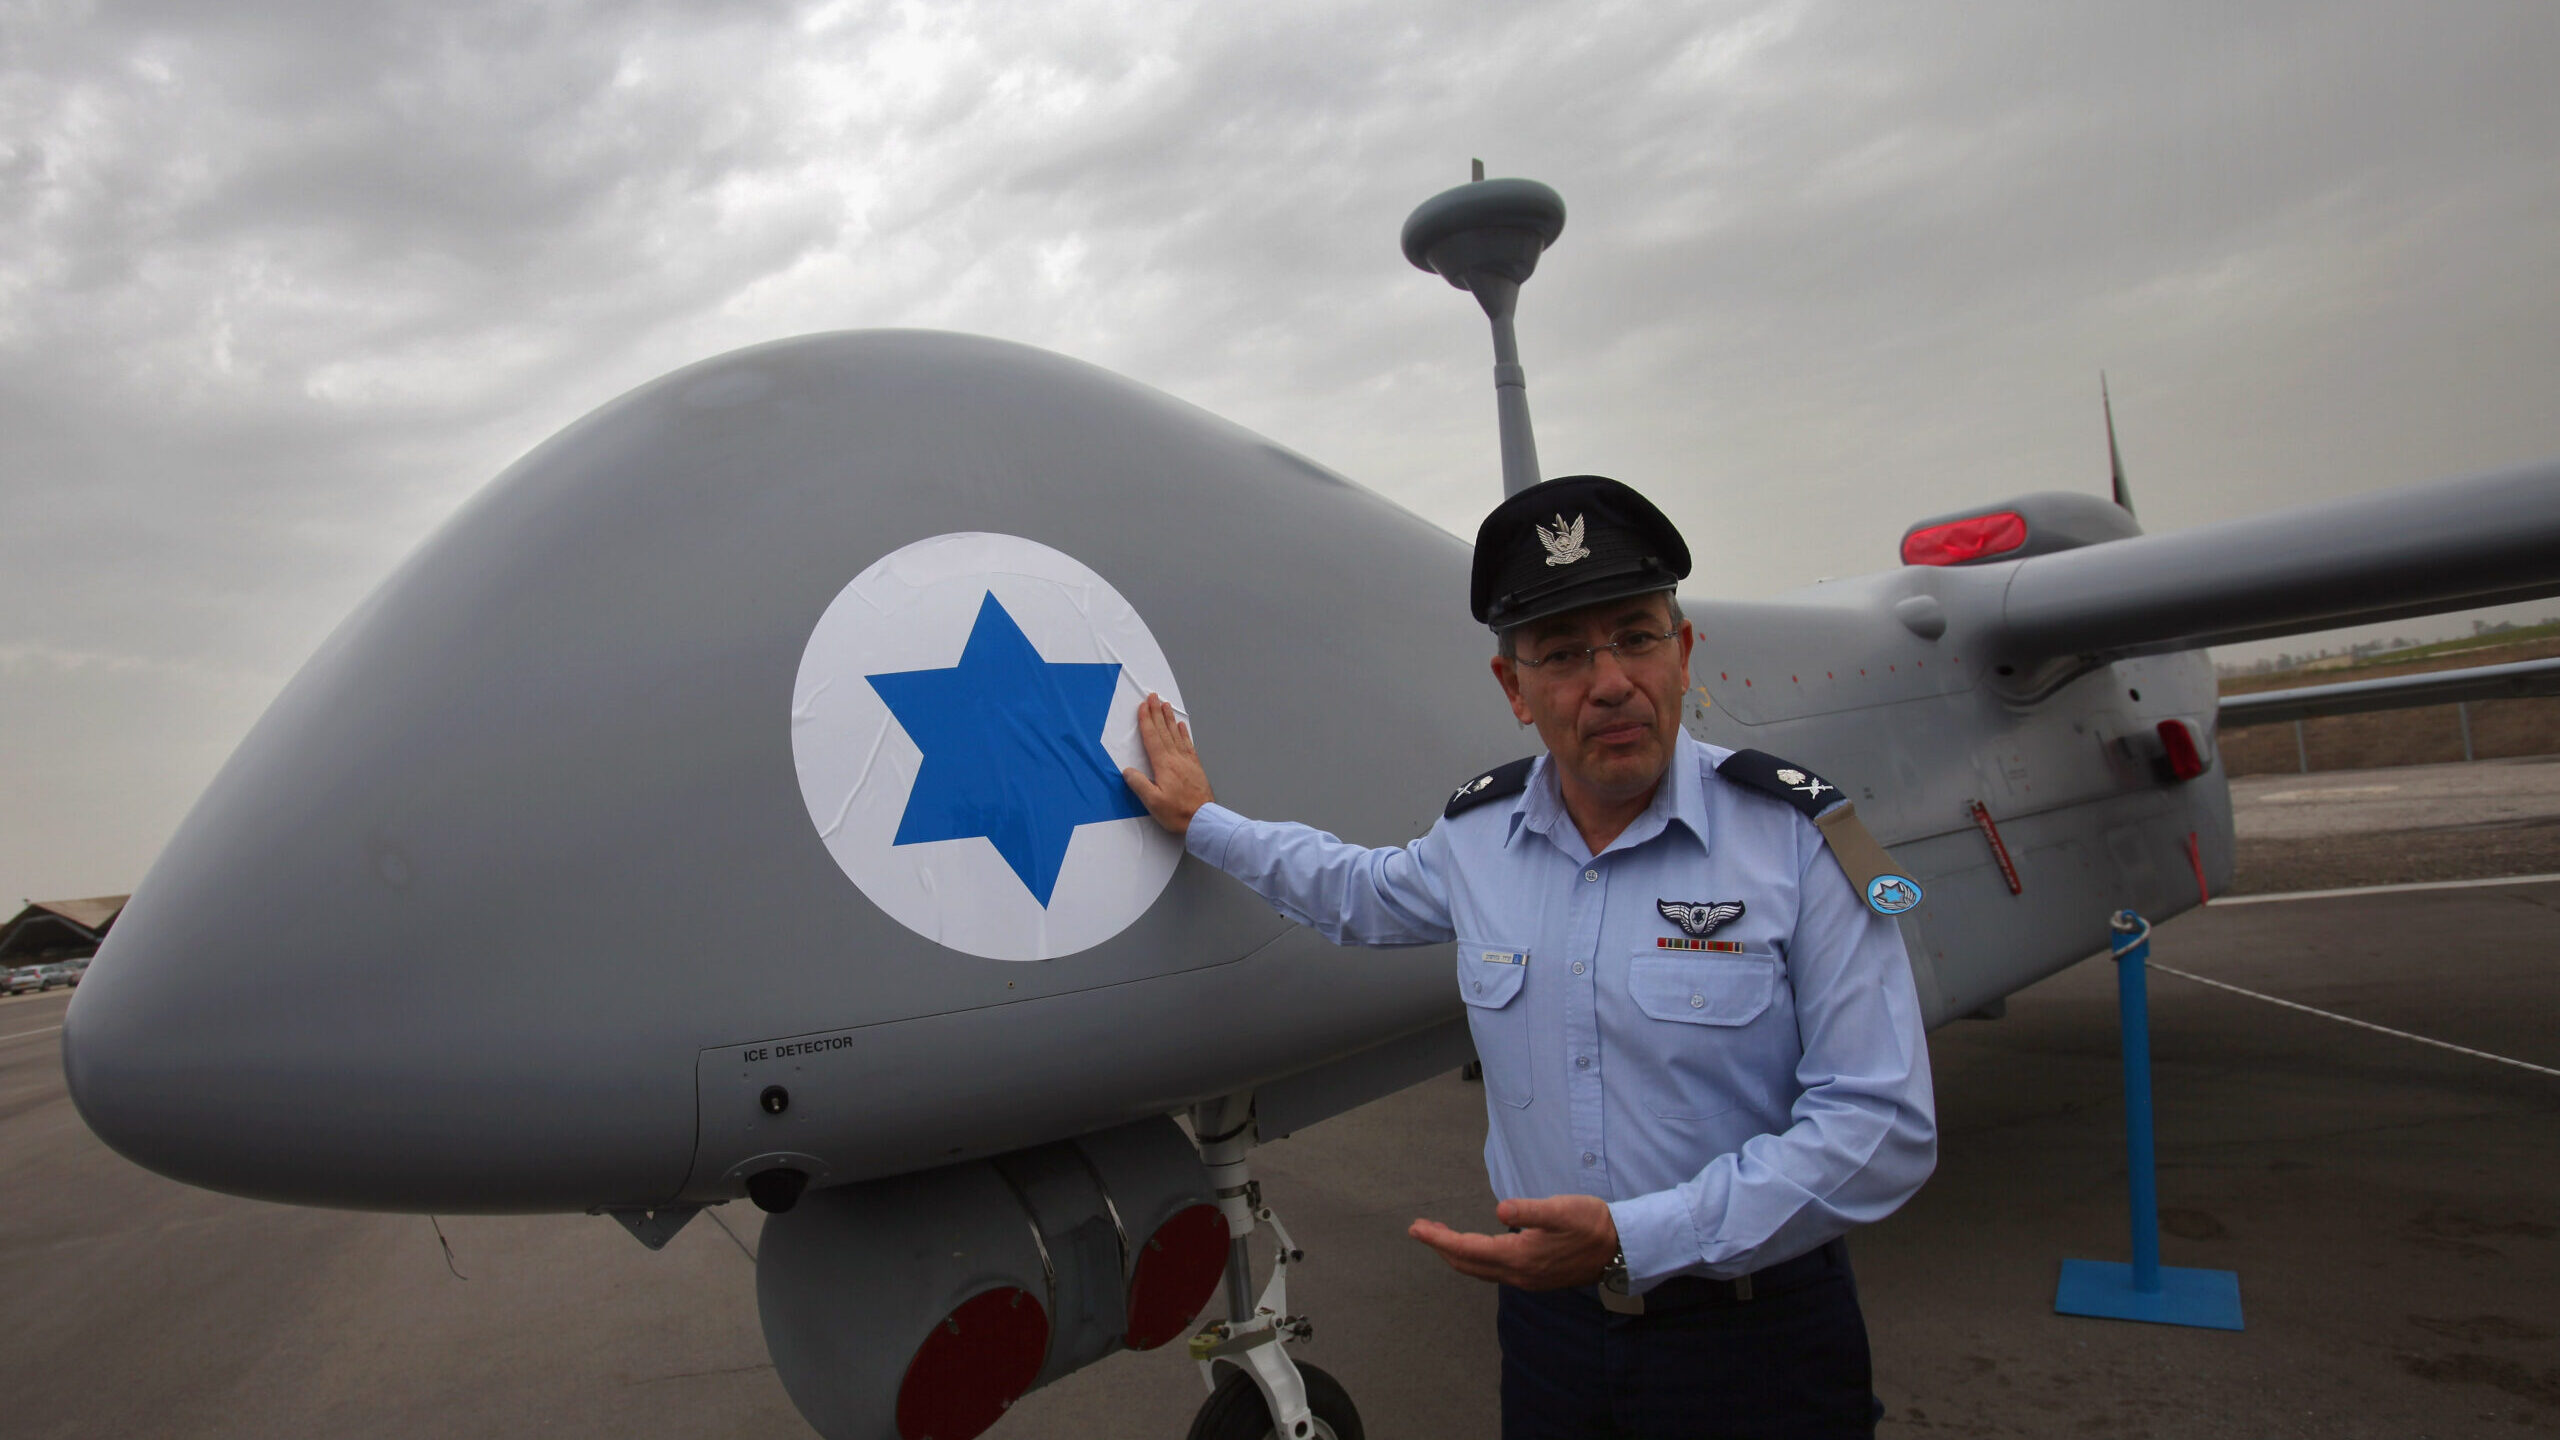 Frustration mounts for Israeli defense firms that can’t export payloads for drones